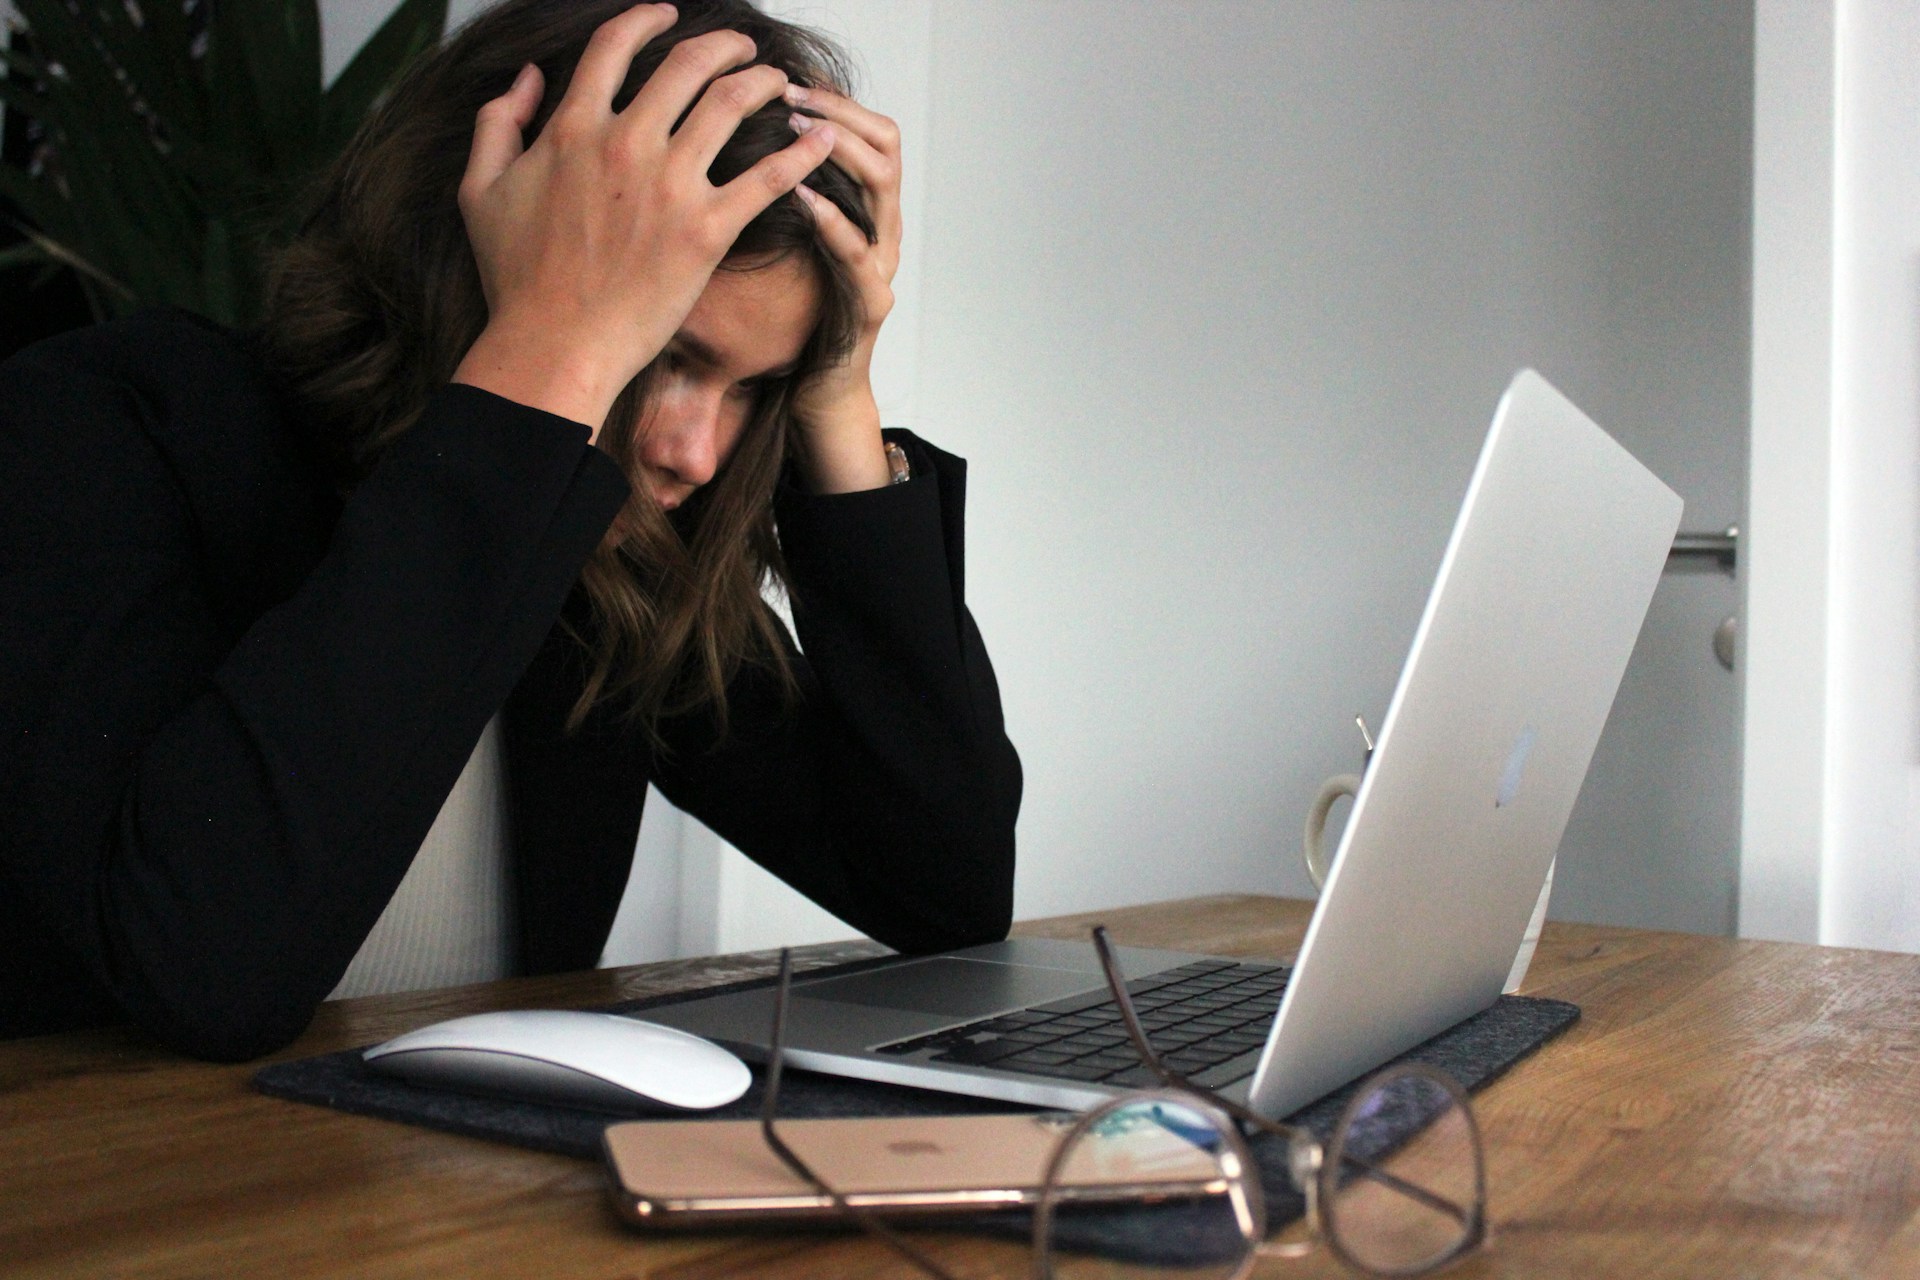 Frustrated woman with her head in her hands using a laptop